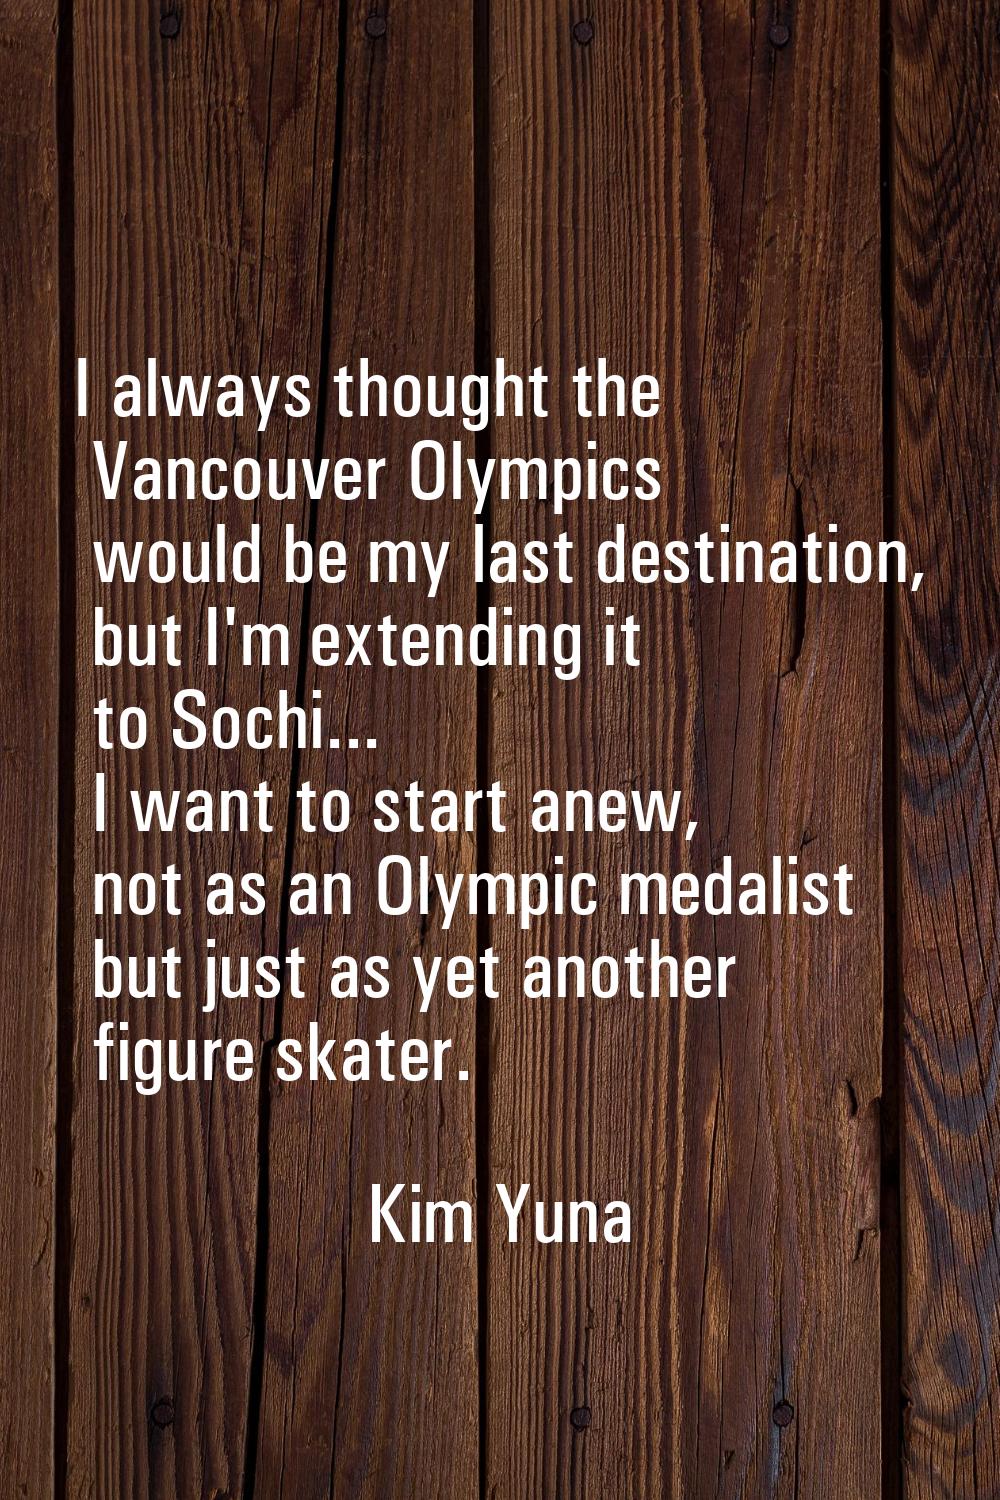 I always thought the Vancouver Olympics would be my last destination, but I'm extending it to Sochi